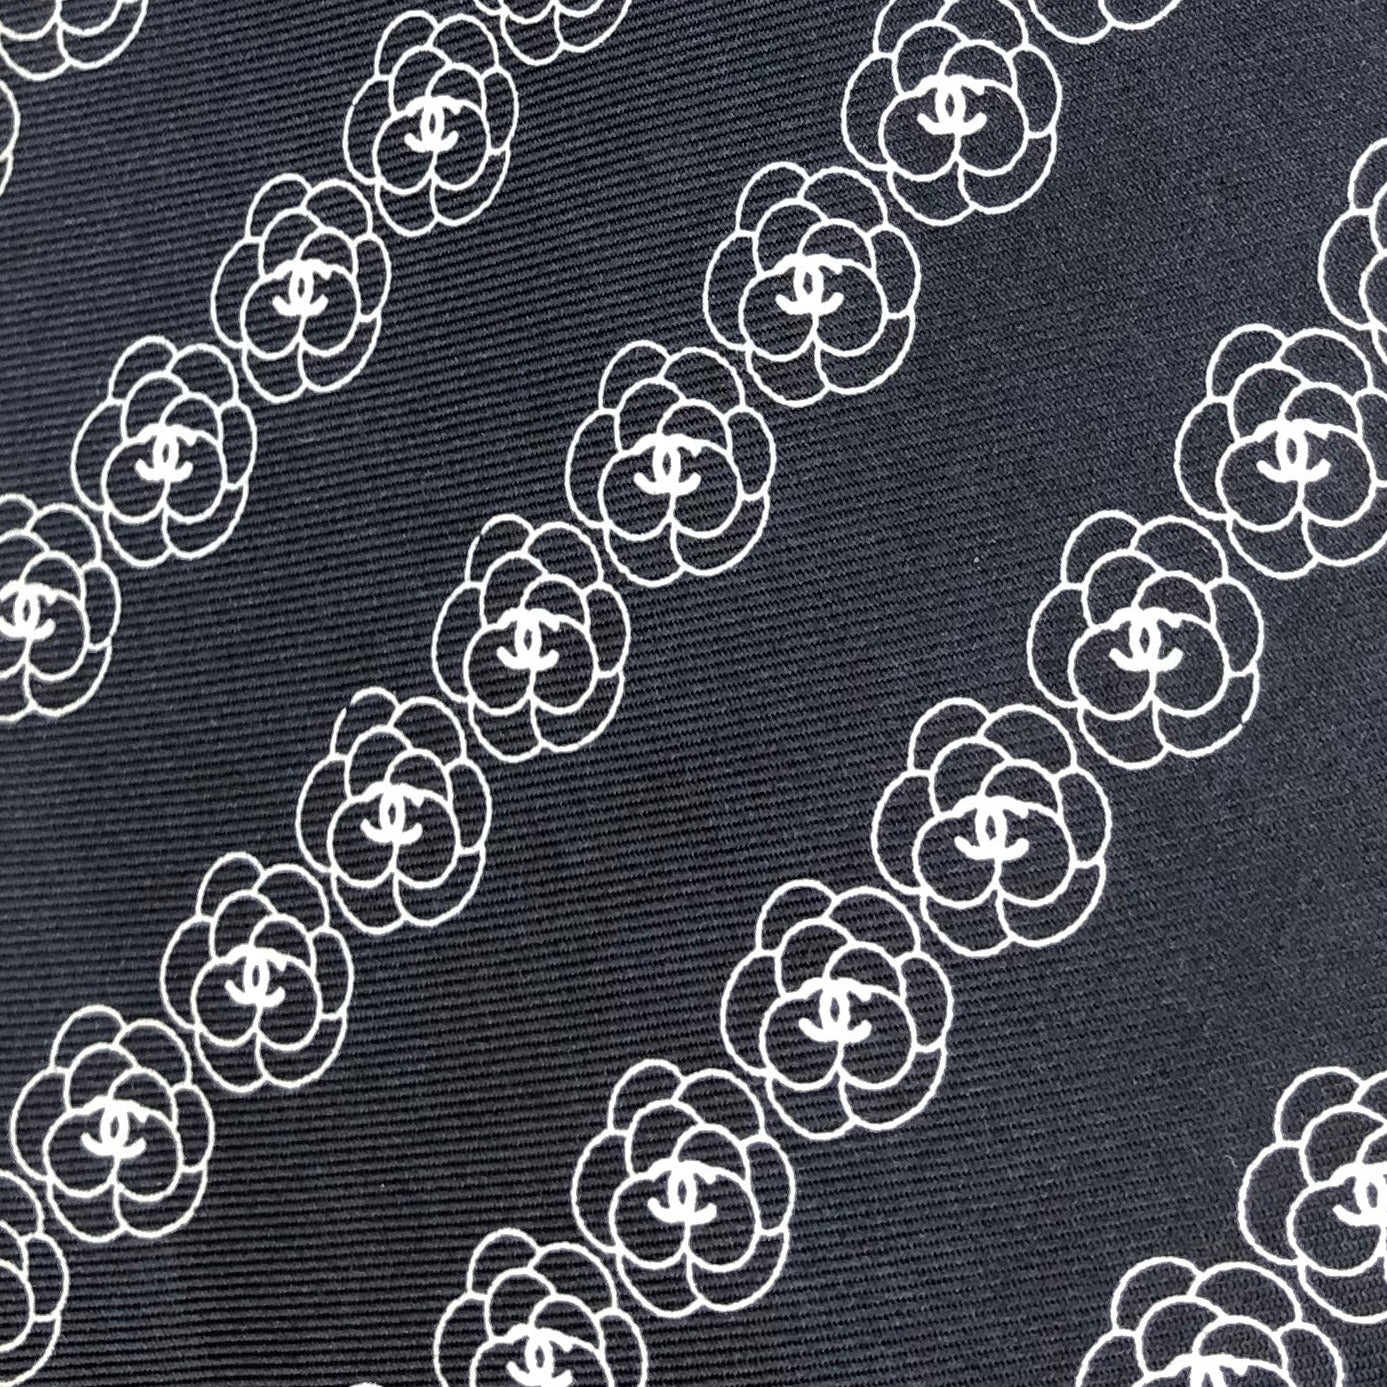 Tailormade fabric: Chanel